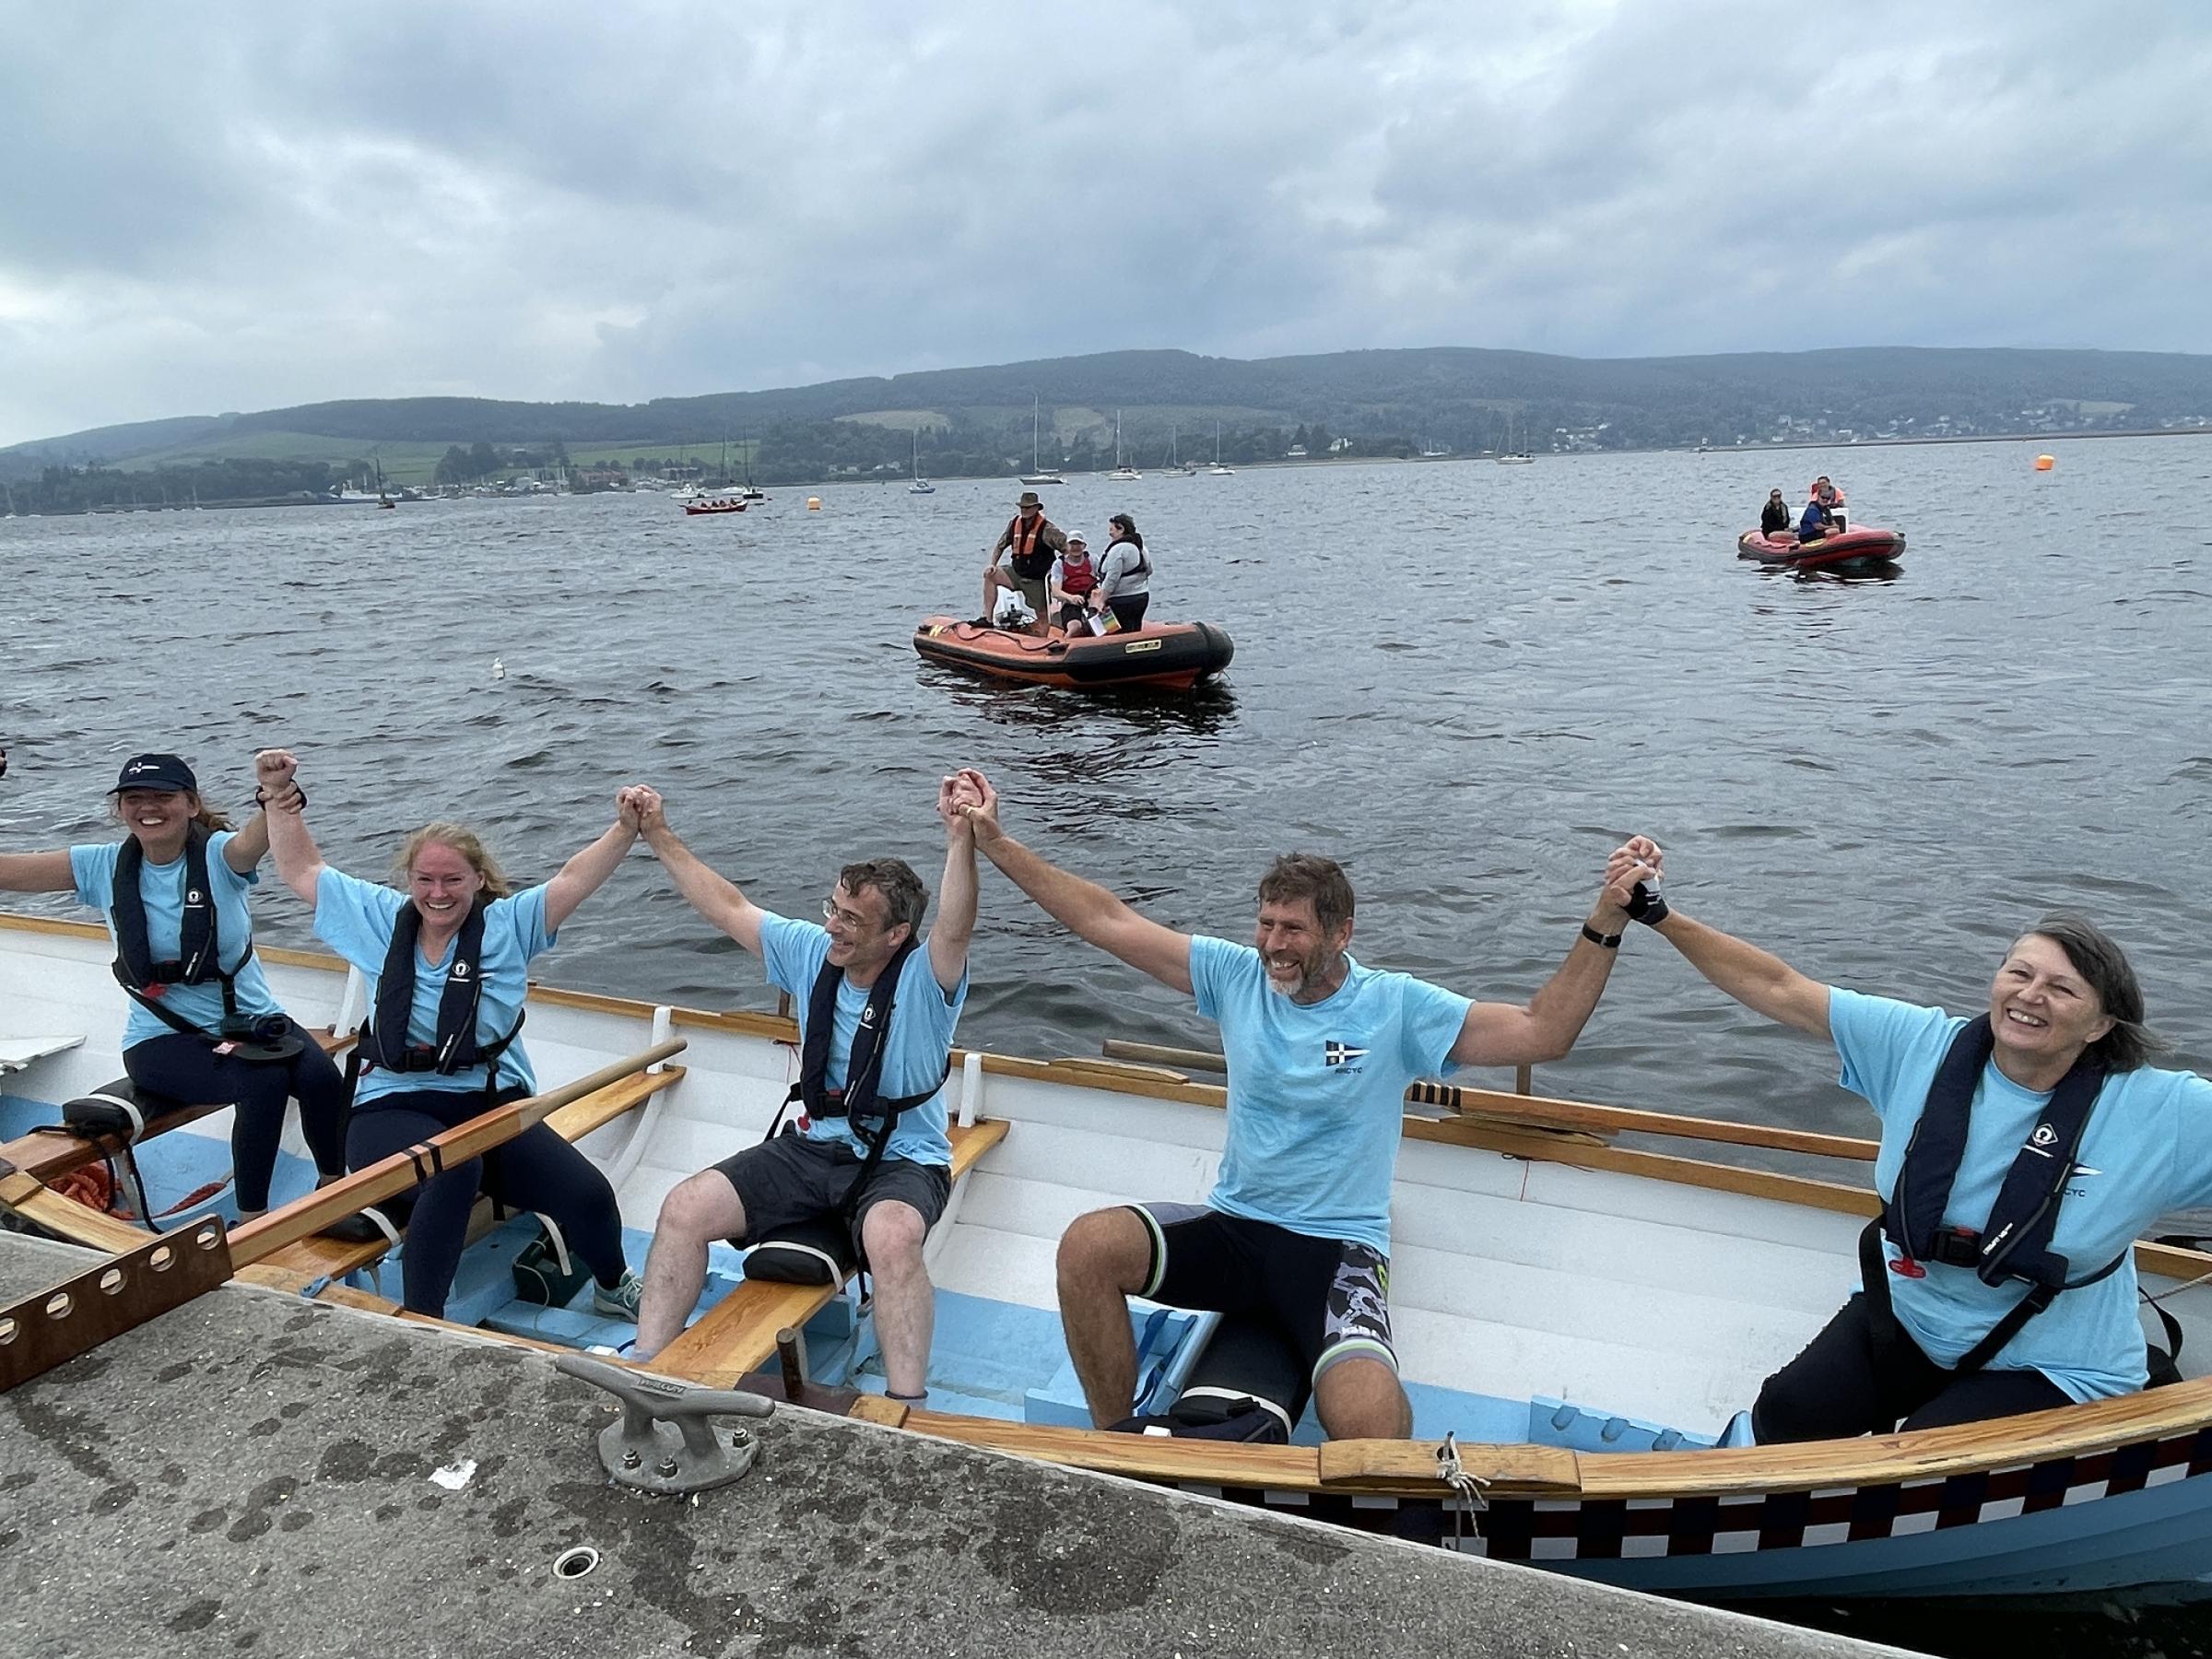 The Royal Northern and Clyde Yacht Club held its second coastal rowing regatta on September 9 (Photo: RNCYC)